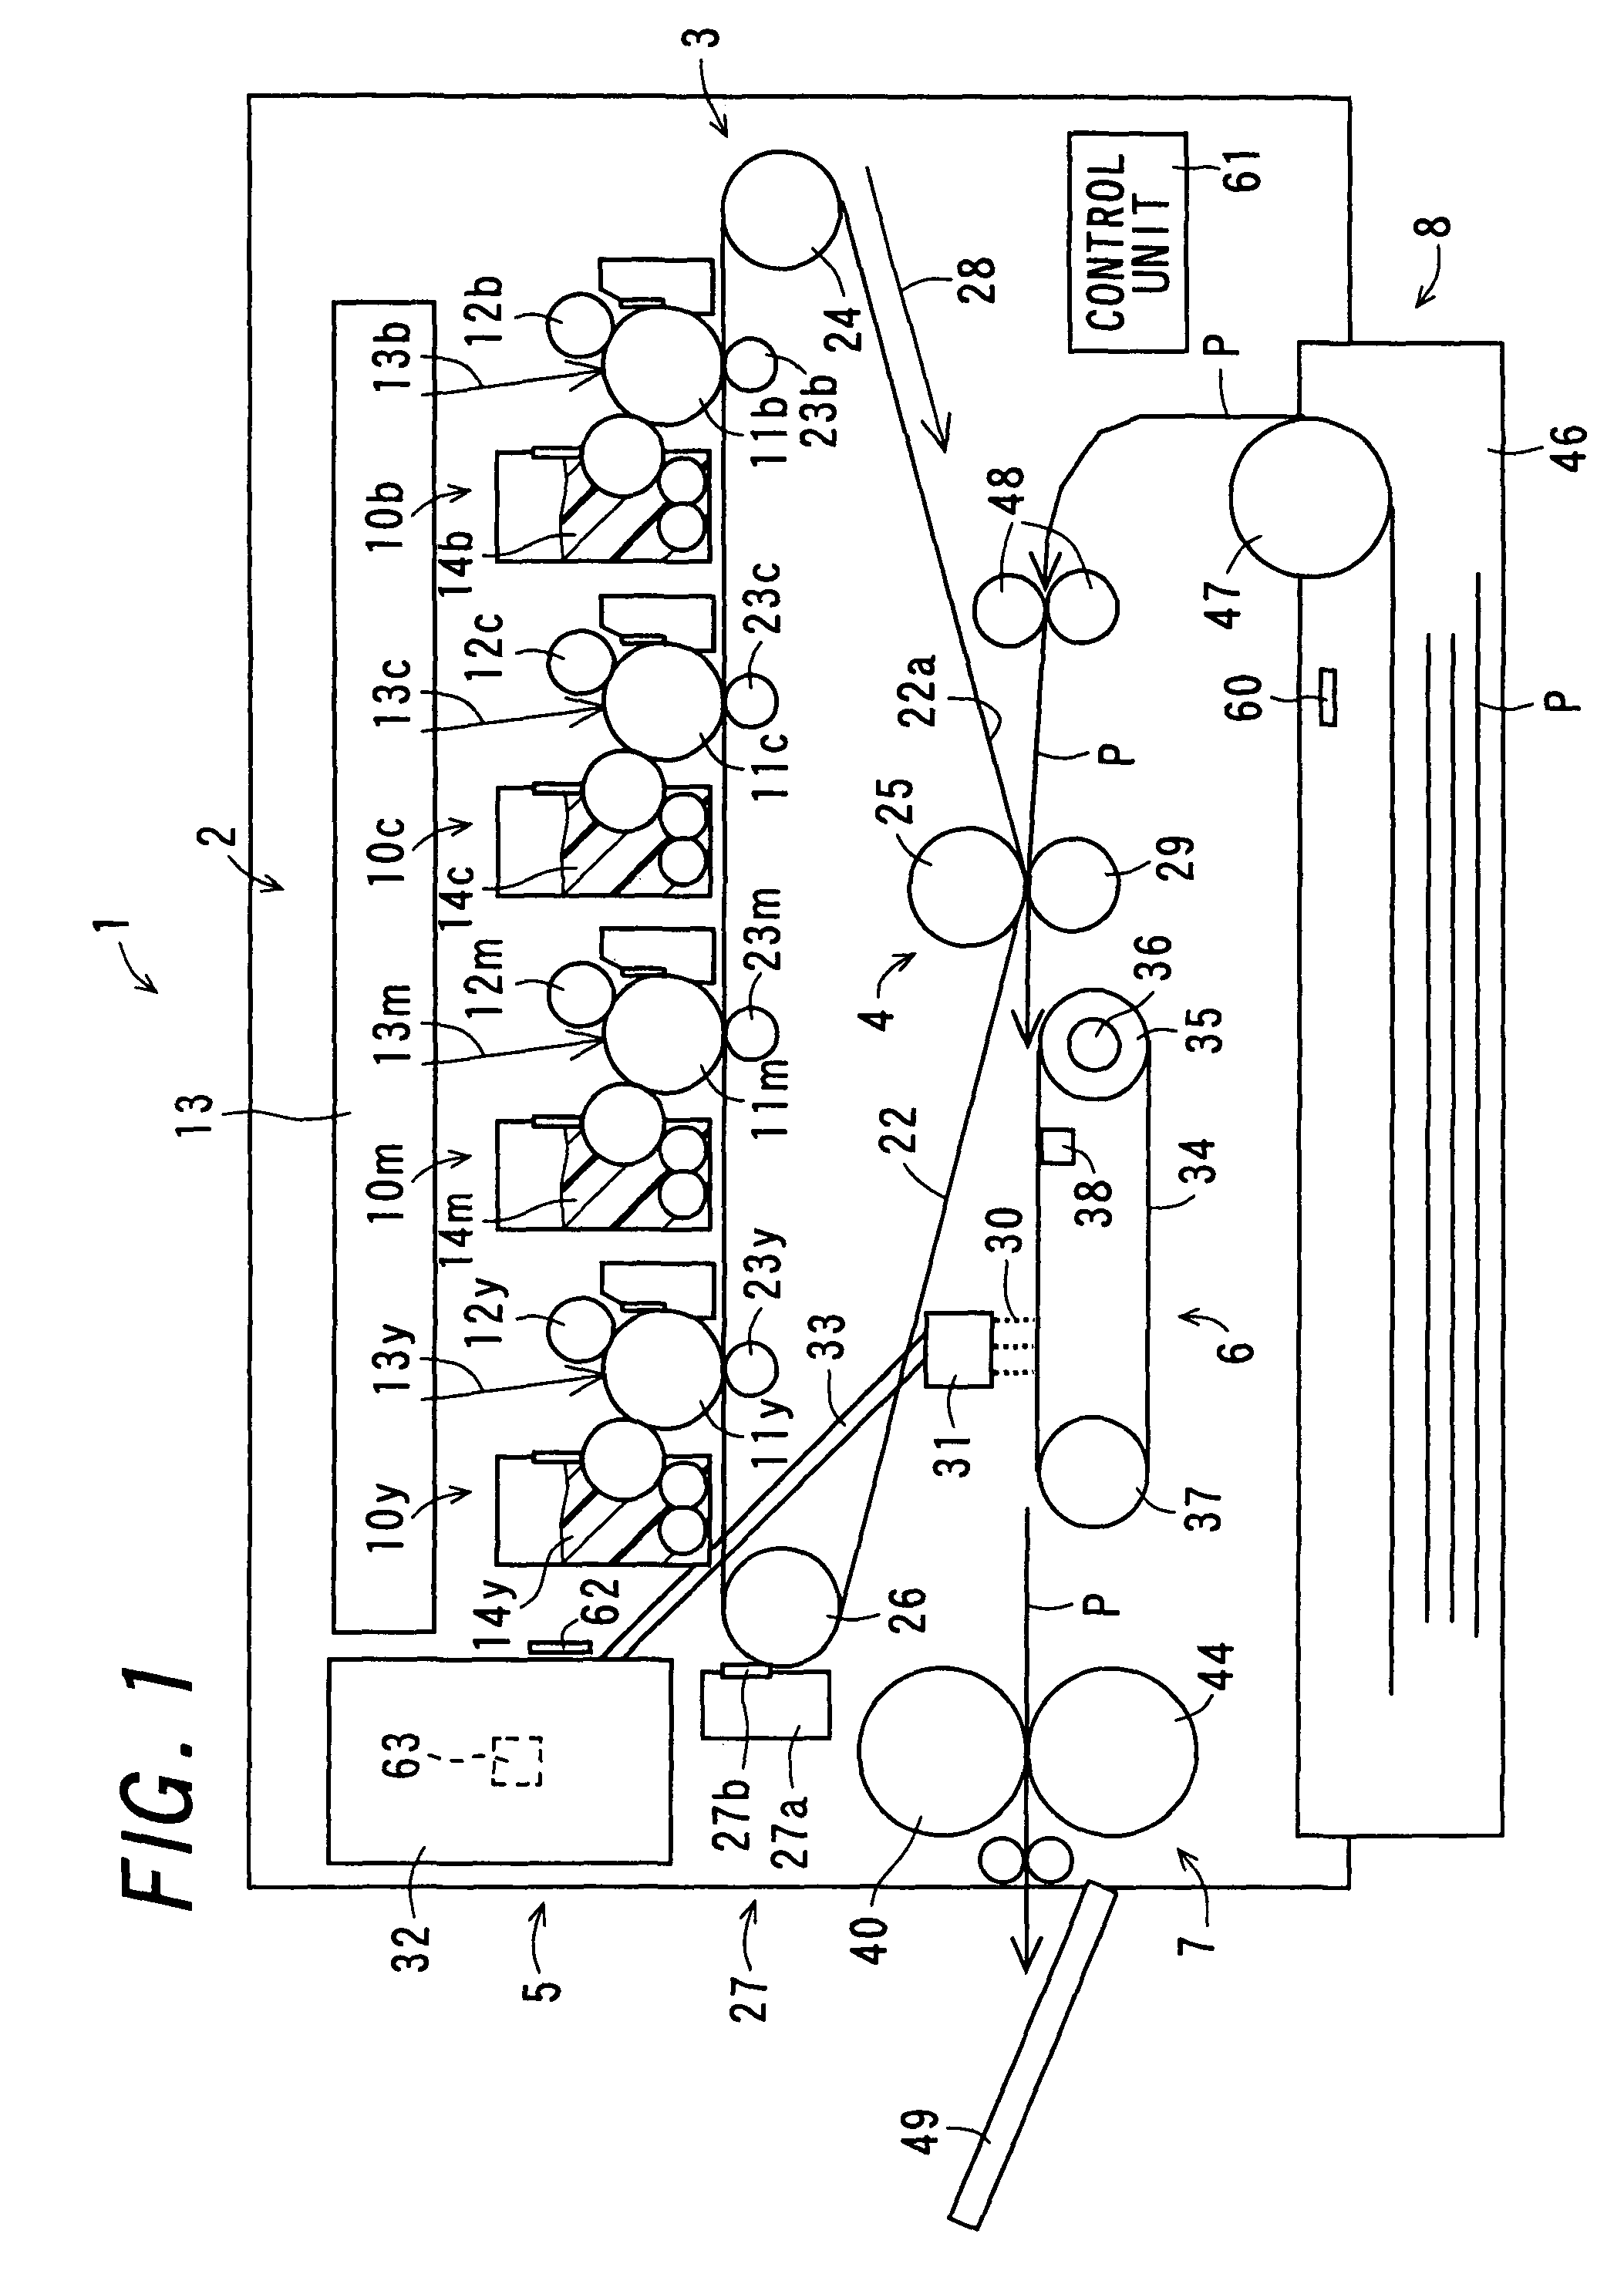 Image forming apparatus controlling a droplet size of a fixing solution